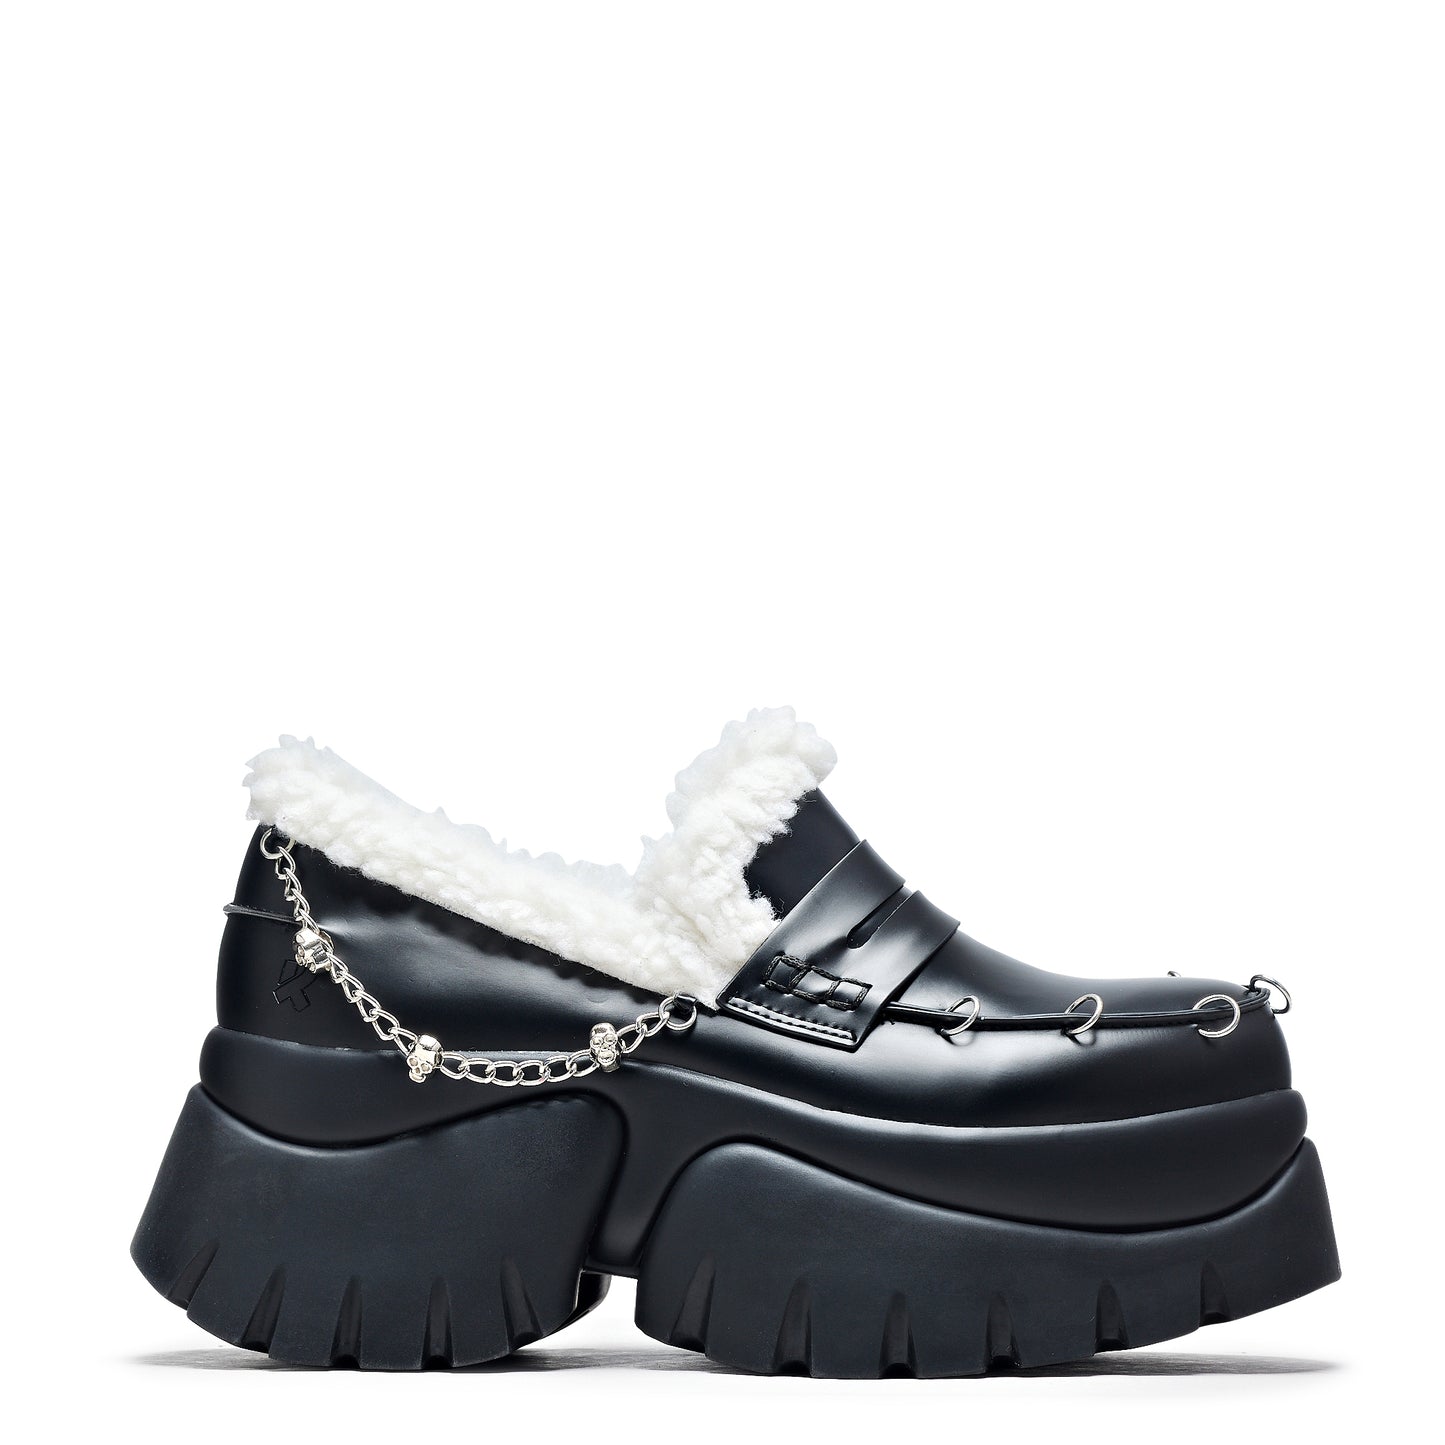 The Visitors Faux Fur Chunky Loafers - Black - Shoes - KOI Footwear - Black - Side View